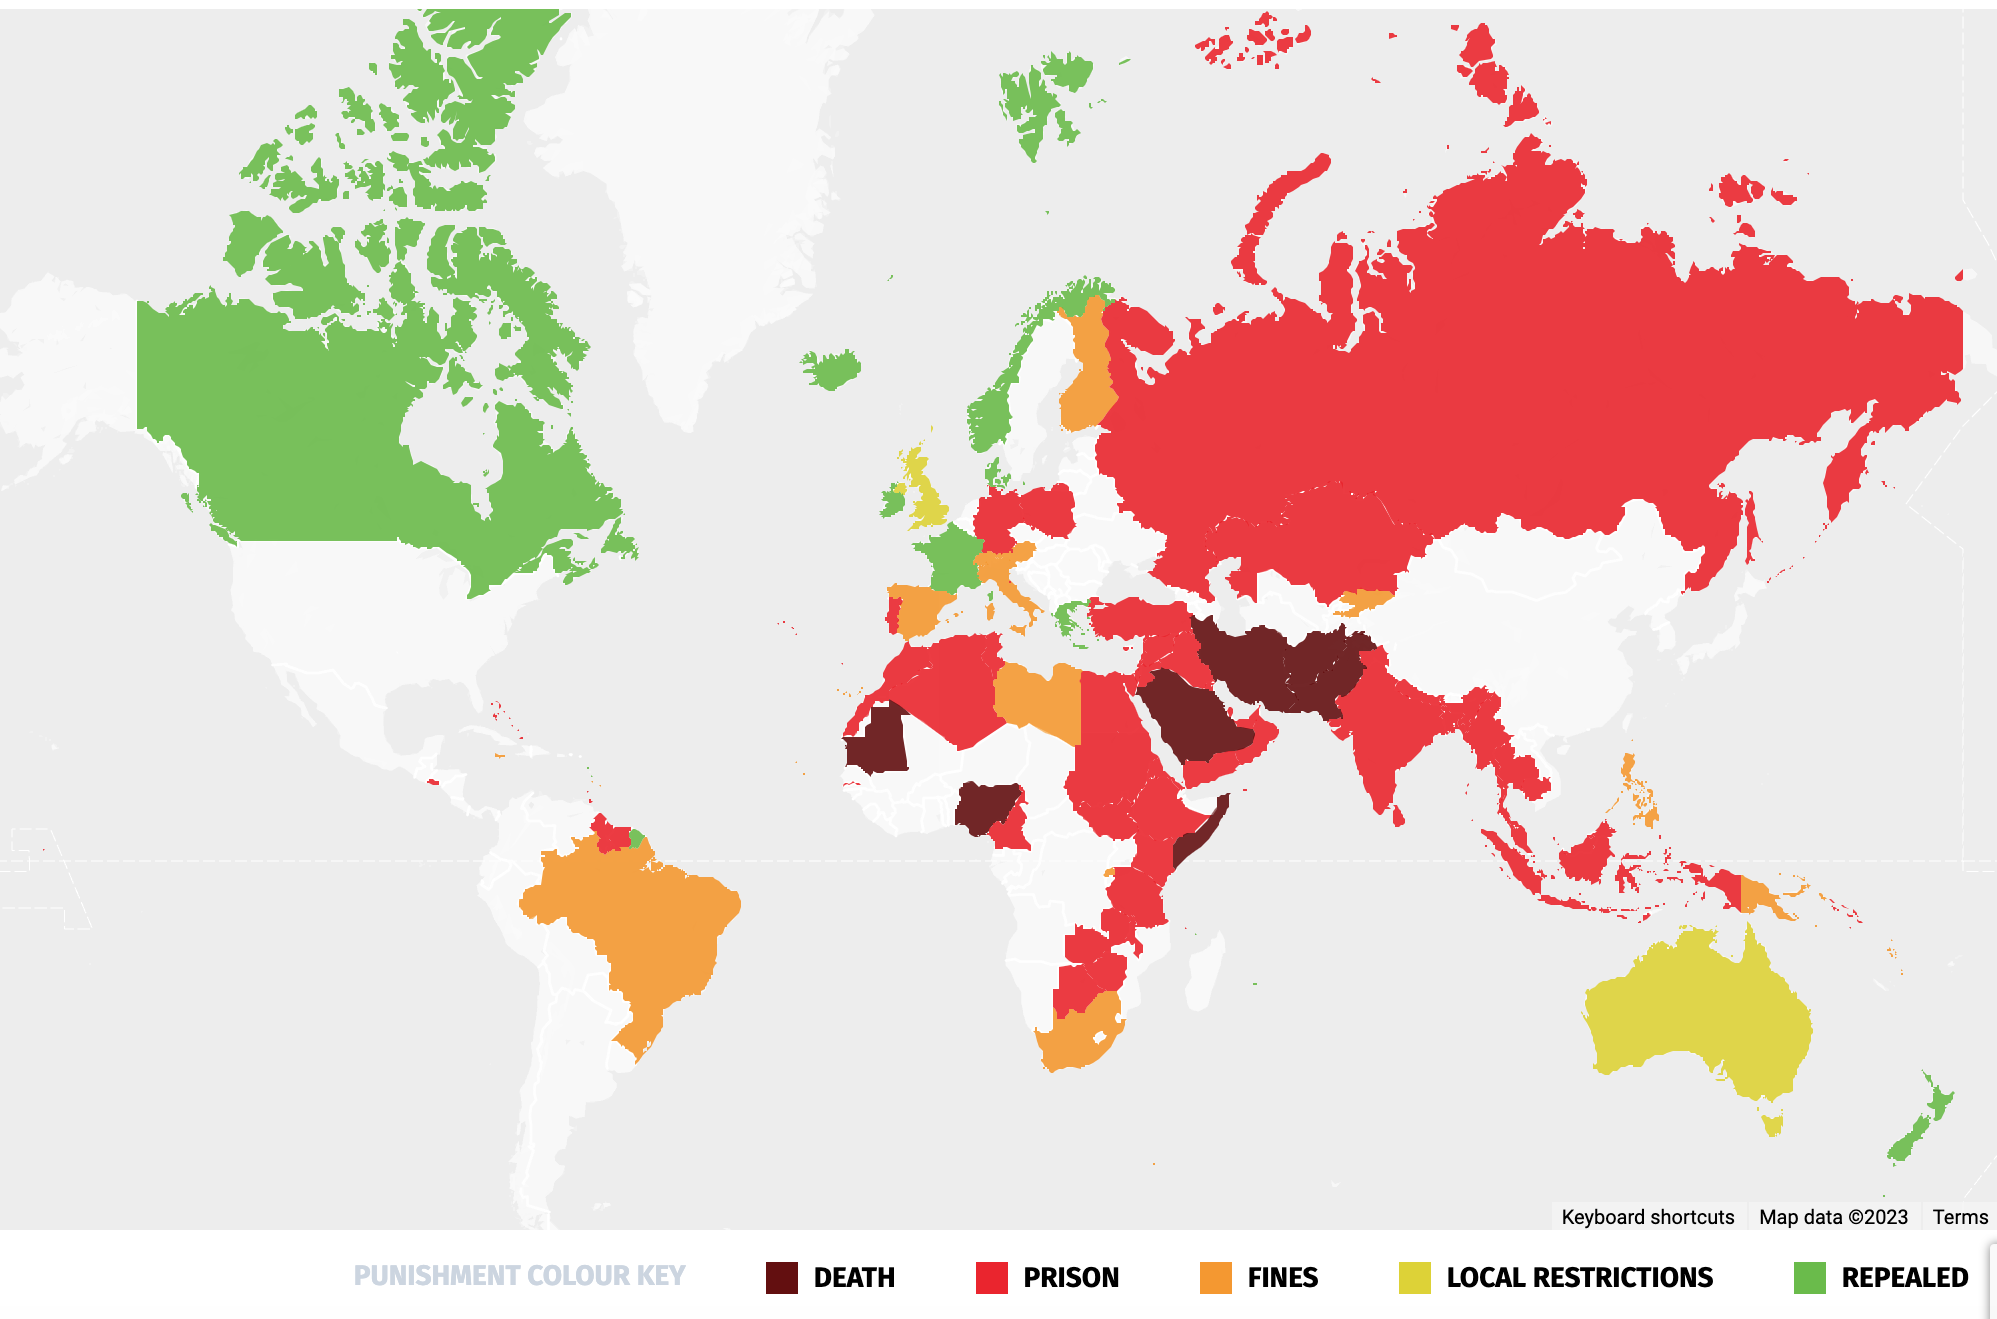 A map depicting punishment types for blasphemy around the world